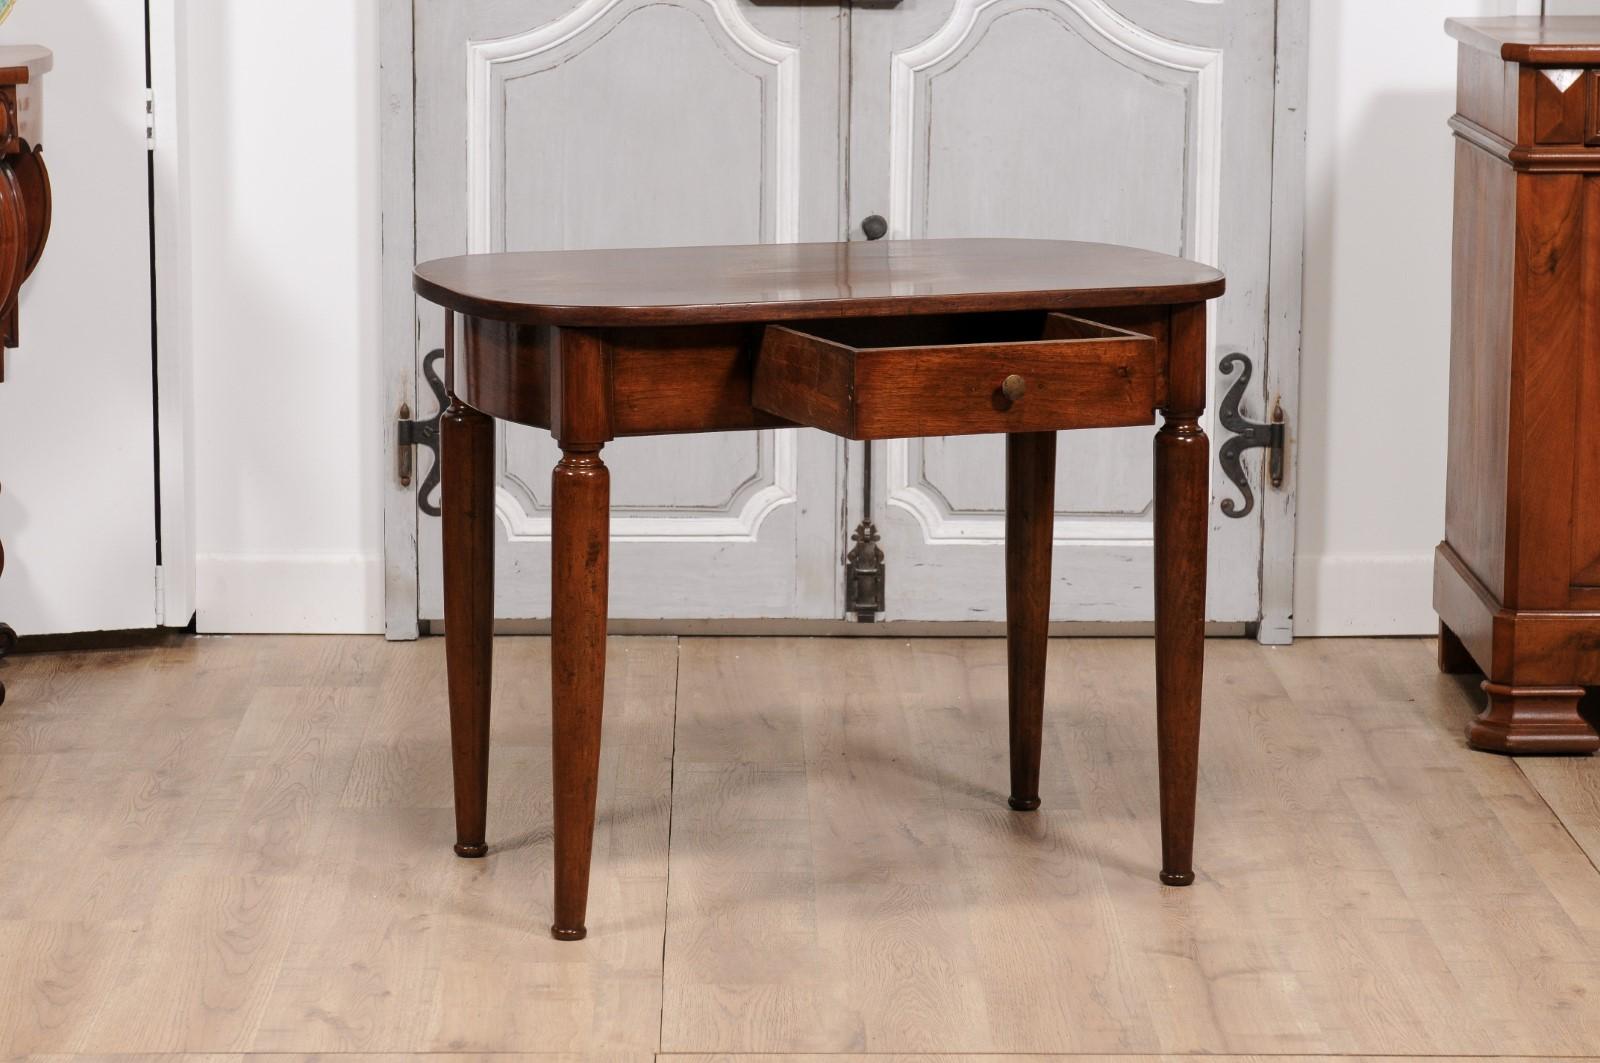 Italian Walnut 1890s Side Table with Oval Top, One Drawer and Cylindrical Legs For Sale 1